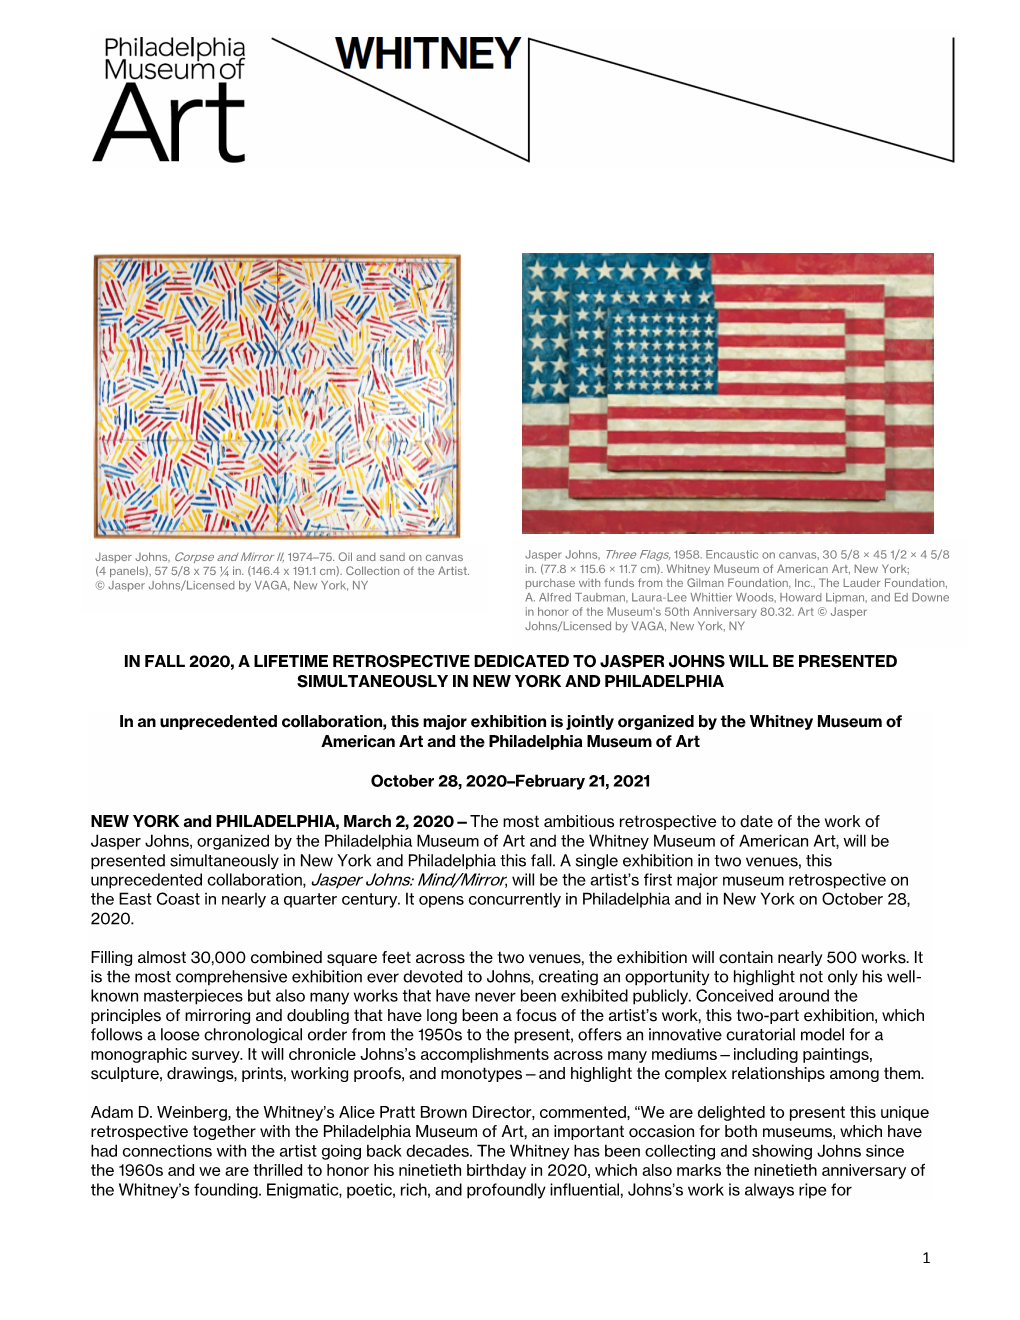 In Fall 2020, a Lifetime Retrospective Dedicated to Jasper Johns Will Be Presented Simultaneously in New York and Philadelphia I